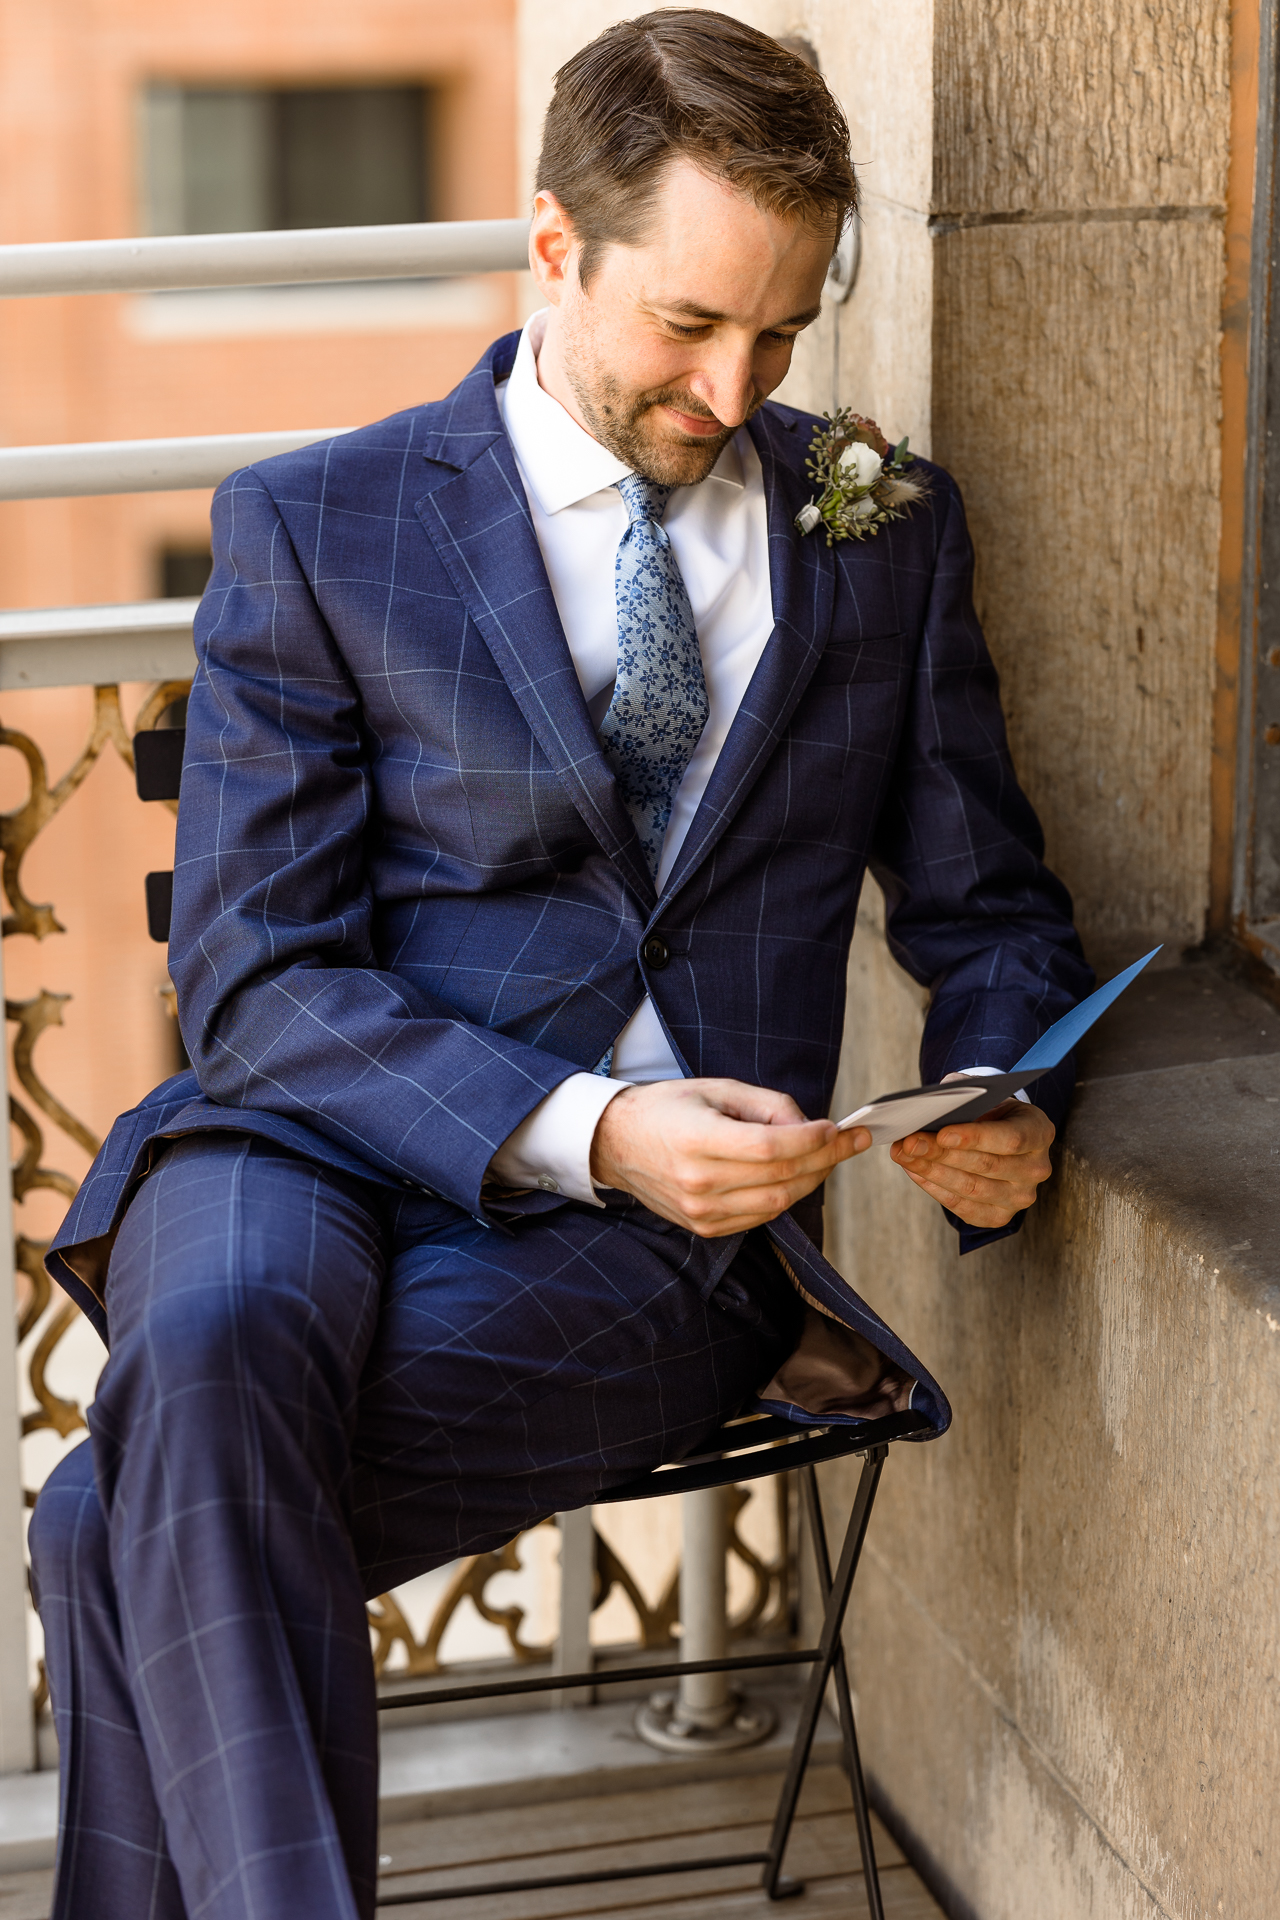 ace hotel downtown los angeles - groom reading letter from bride